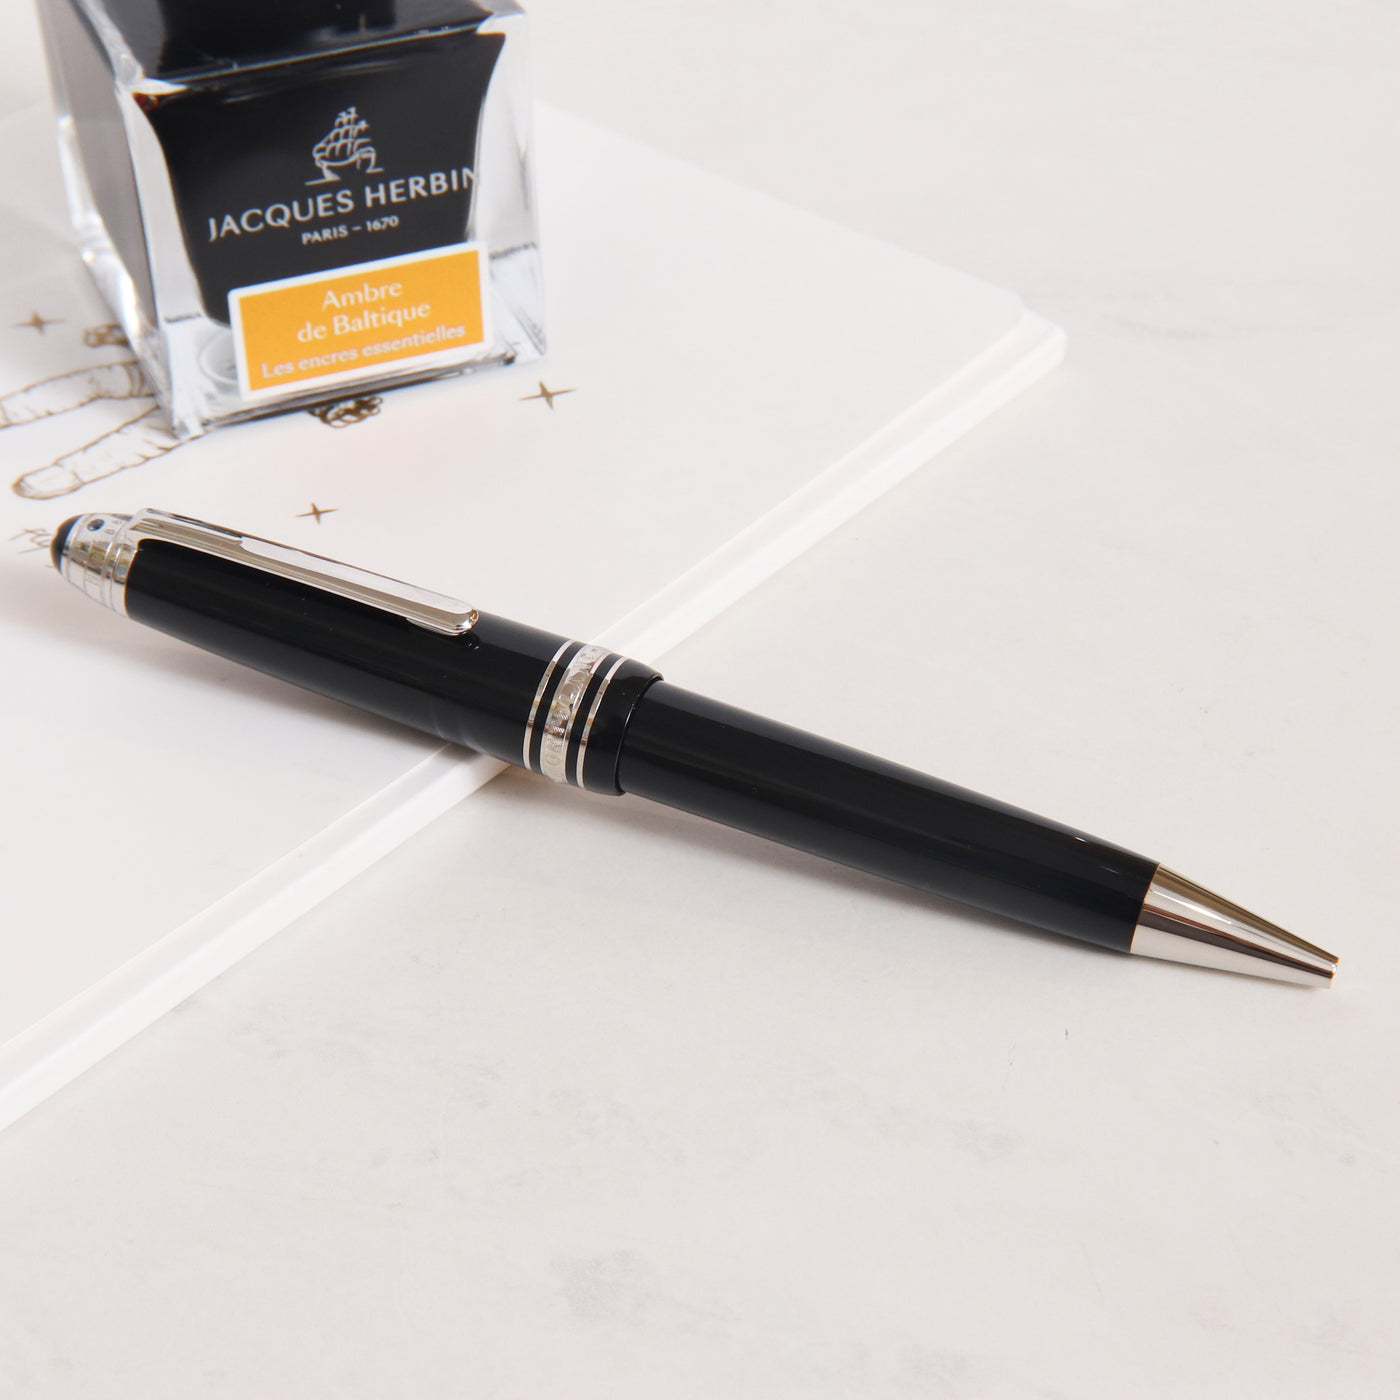 Montblanc Meisterstuck 161 UNICEF 2017 Signature for Good LeGrand Ballpoint Pen - Preowned Closed